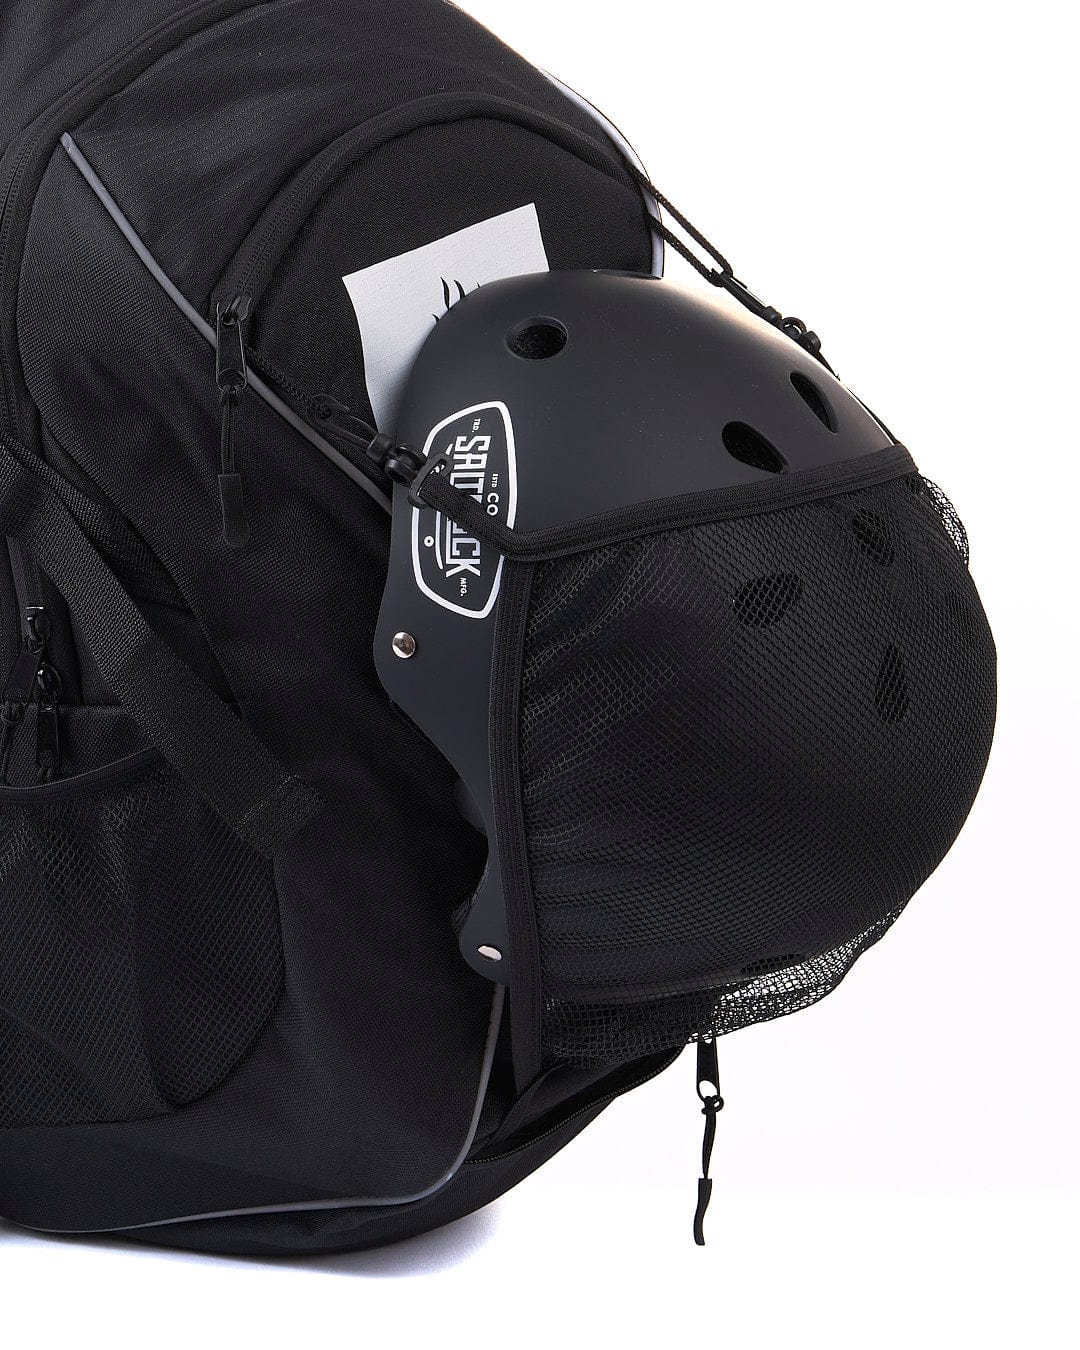 A Cyclone - Urban Backpack - Black by Saltrock with a helmet attached to it.